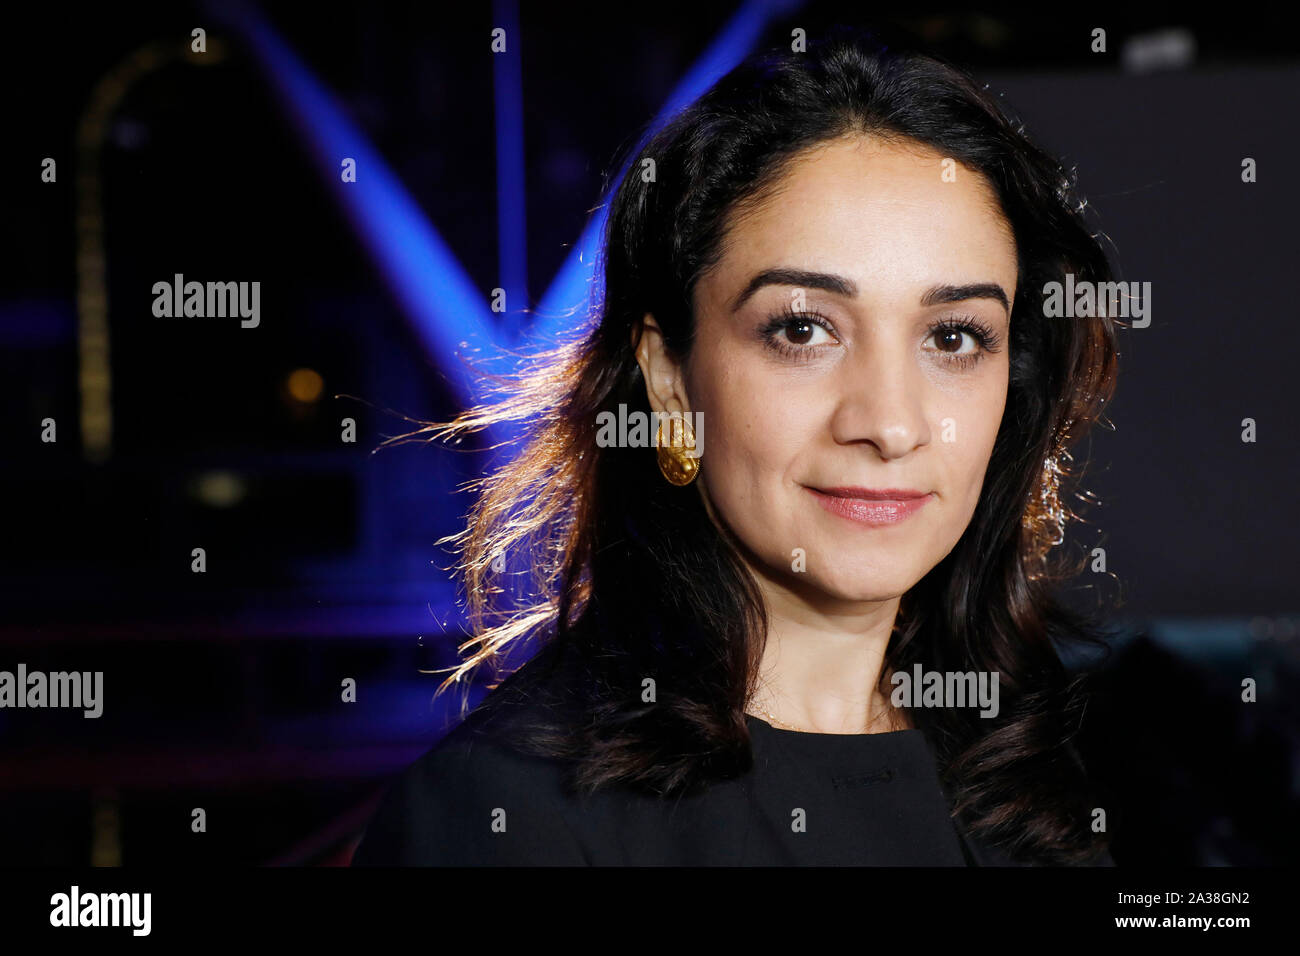 London, UK. 5th Oct, 2019.Lawyer and human rights activist Leila Alikarami poses for photographs before the RAW in WAR Anna Politkovskaya Award 2018, at a ceremony in London Saturday October 5. Alexievich received the award for speaking out about injustices in the post-Soviet space. The award in memory of journalist Anna Polikotkovskaya who was murdered in 2006 is presented annually, by the Reach All Women in WAR (RAW in WAR) charity to a female human rights defender from a conflict zone. Photograph Credit: Luke MacGregor/Alamy Live News Stock Photo